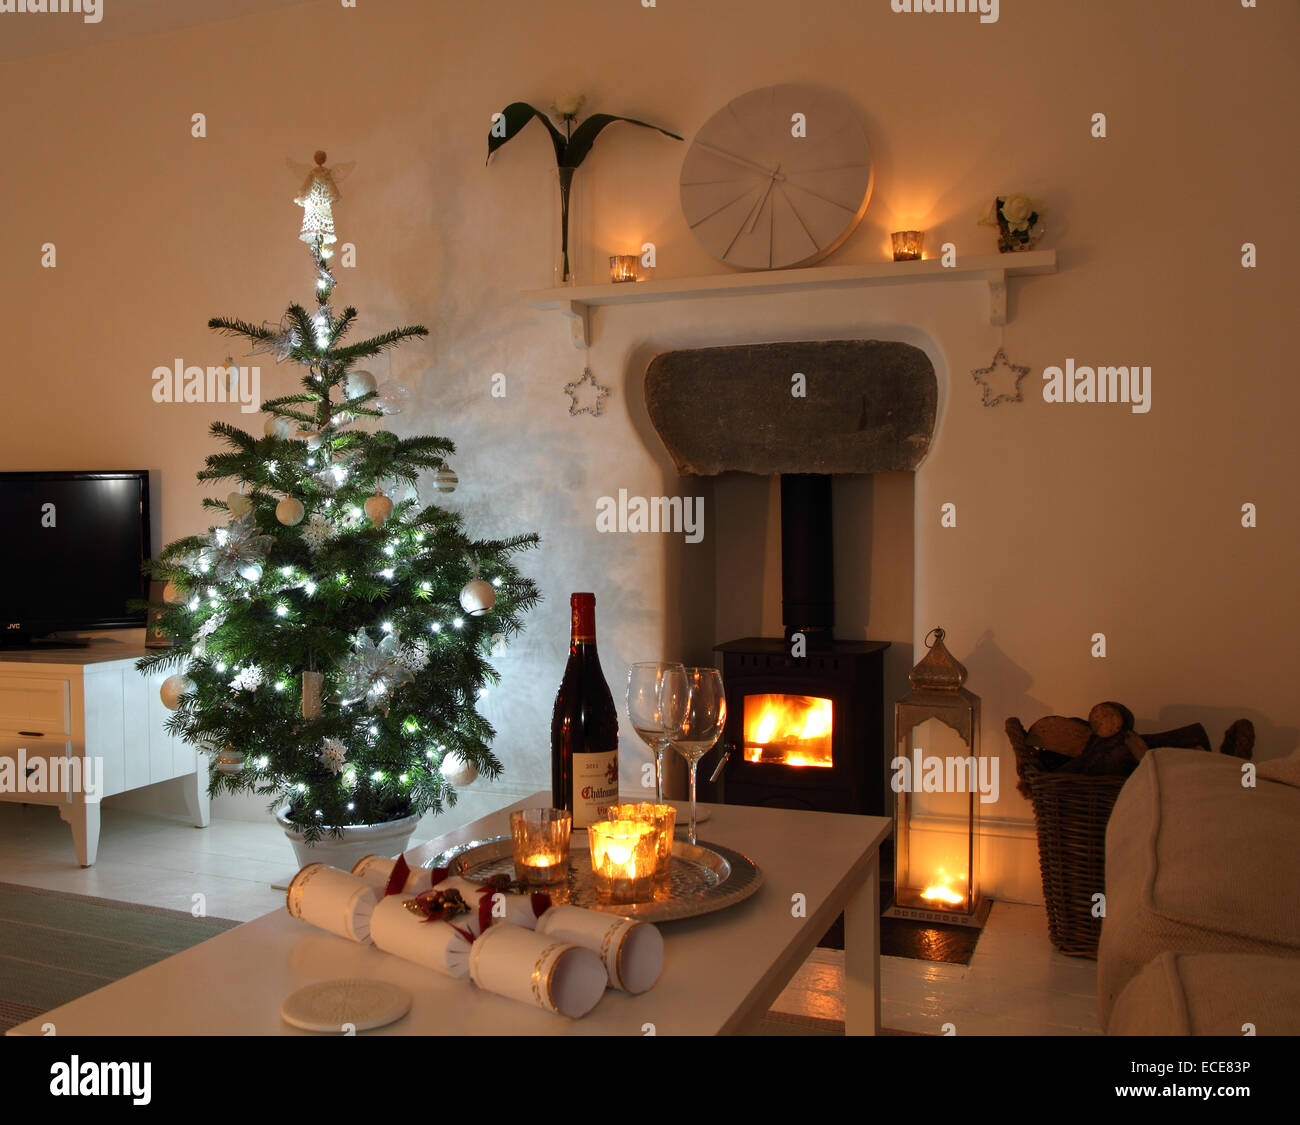 Cosy living/sitting room with fire. Stock Photo